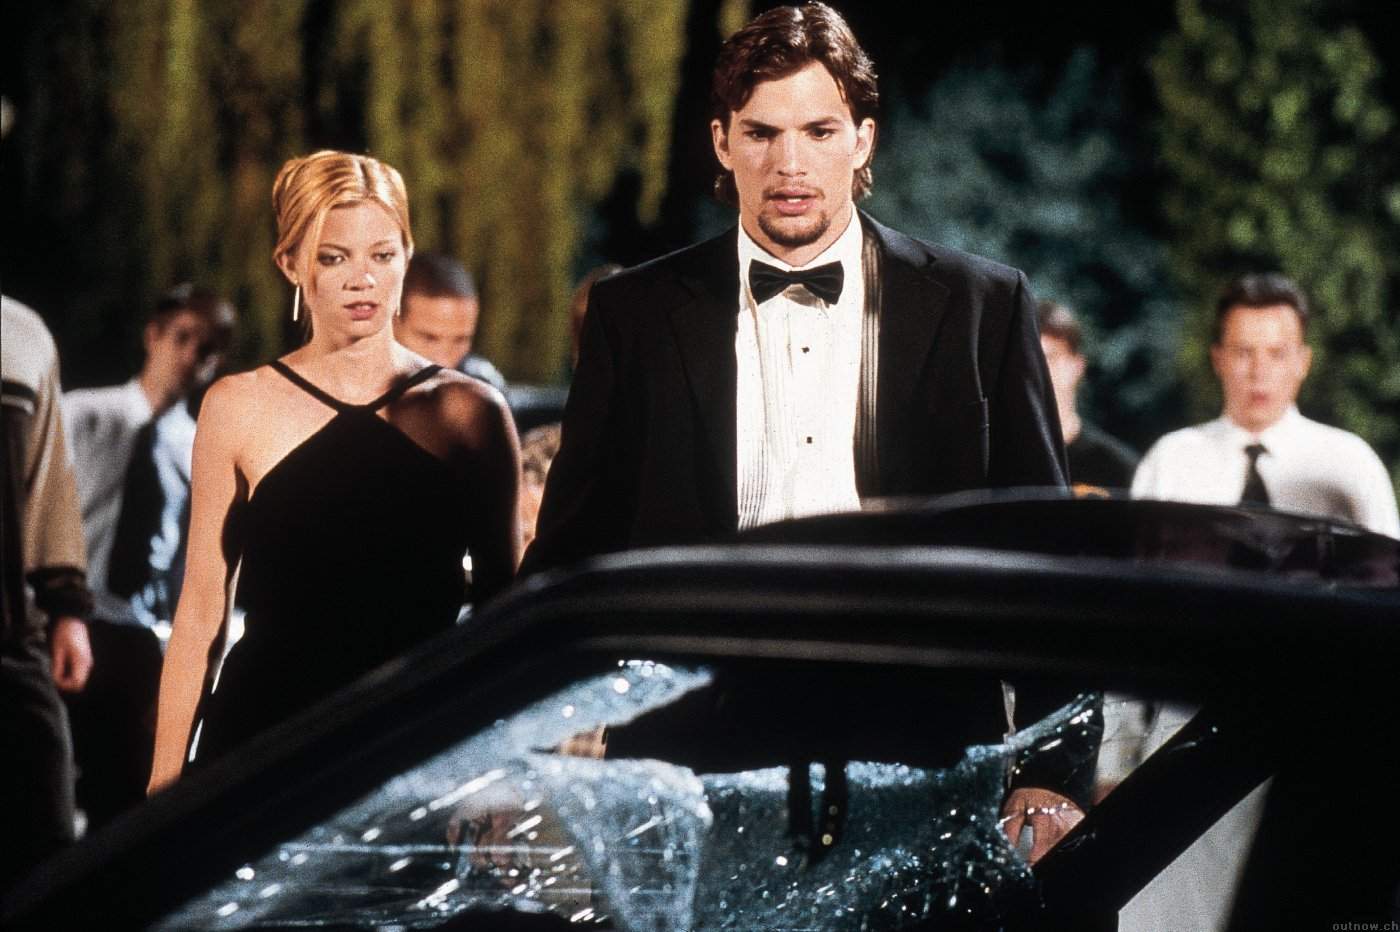 Ashton Kutcher and Amy Smart in New Line Cinema' The Butterfly Effect (2004)